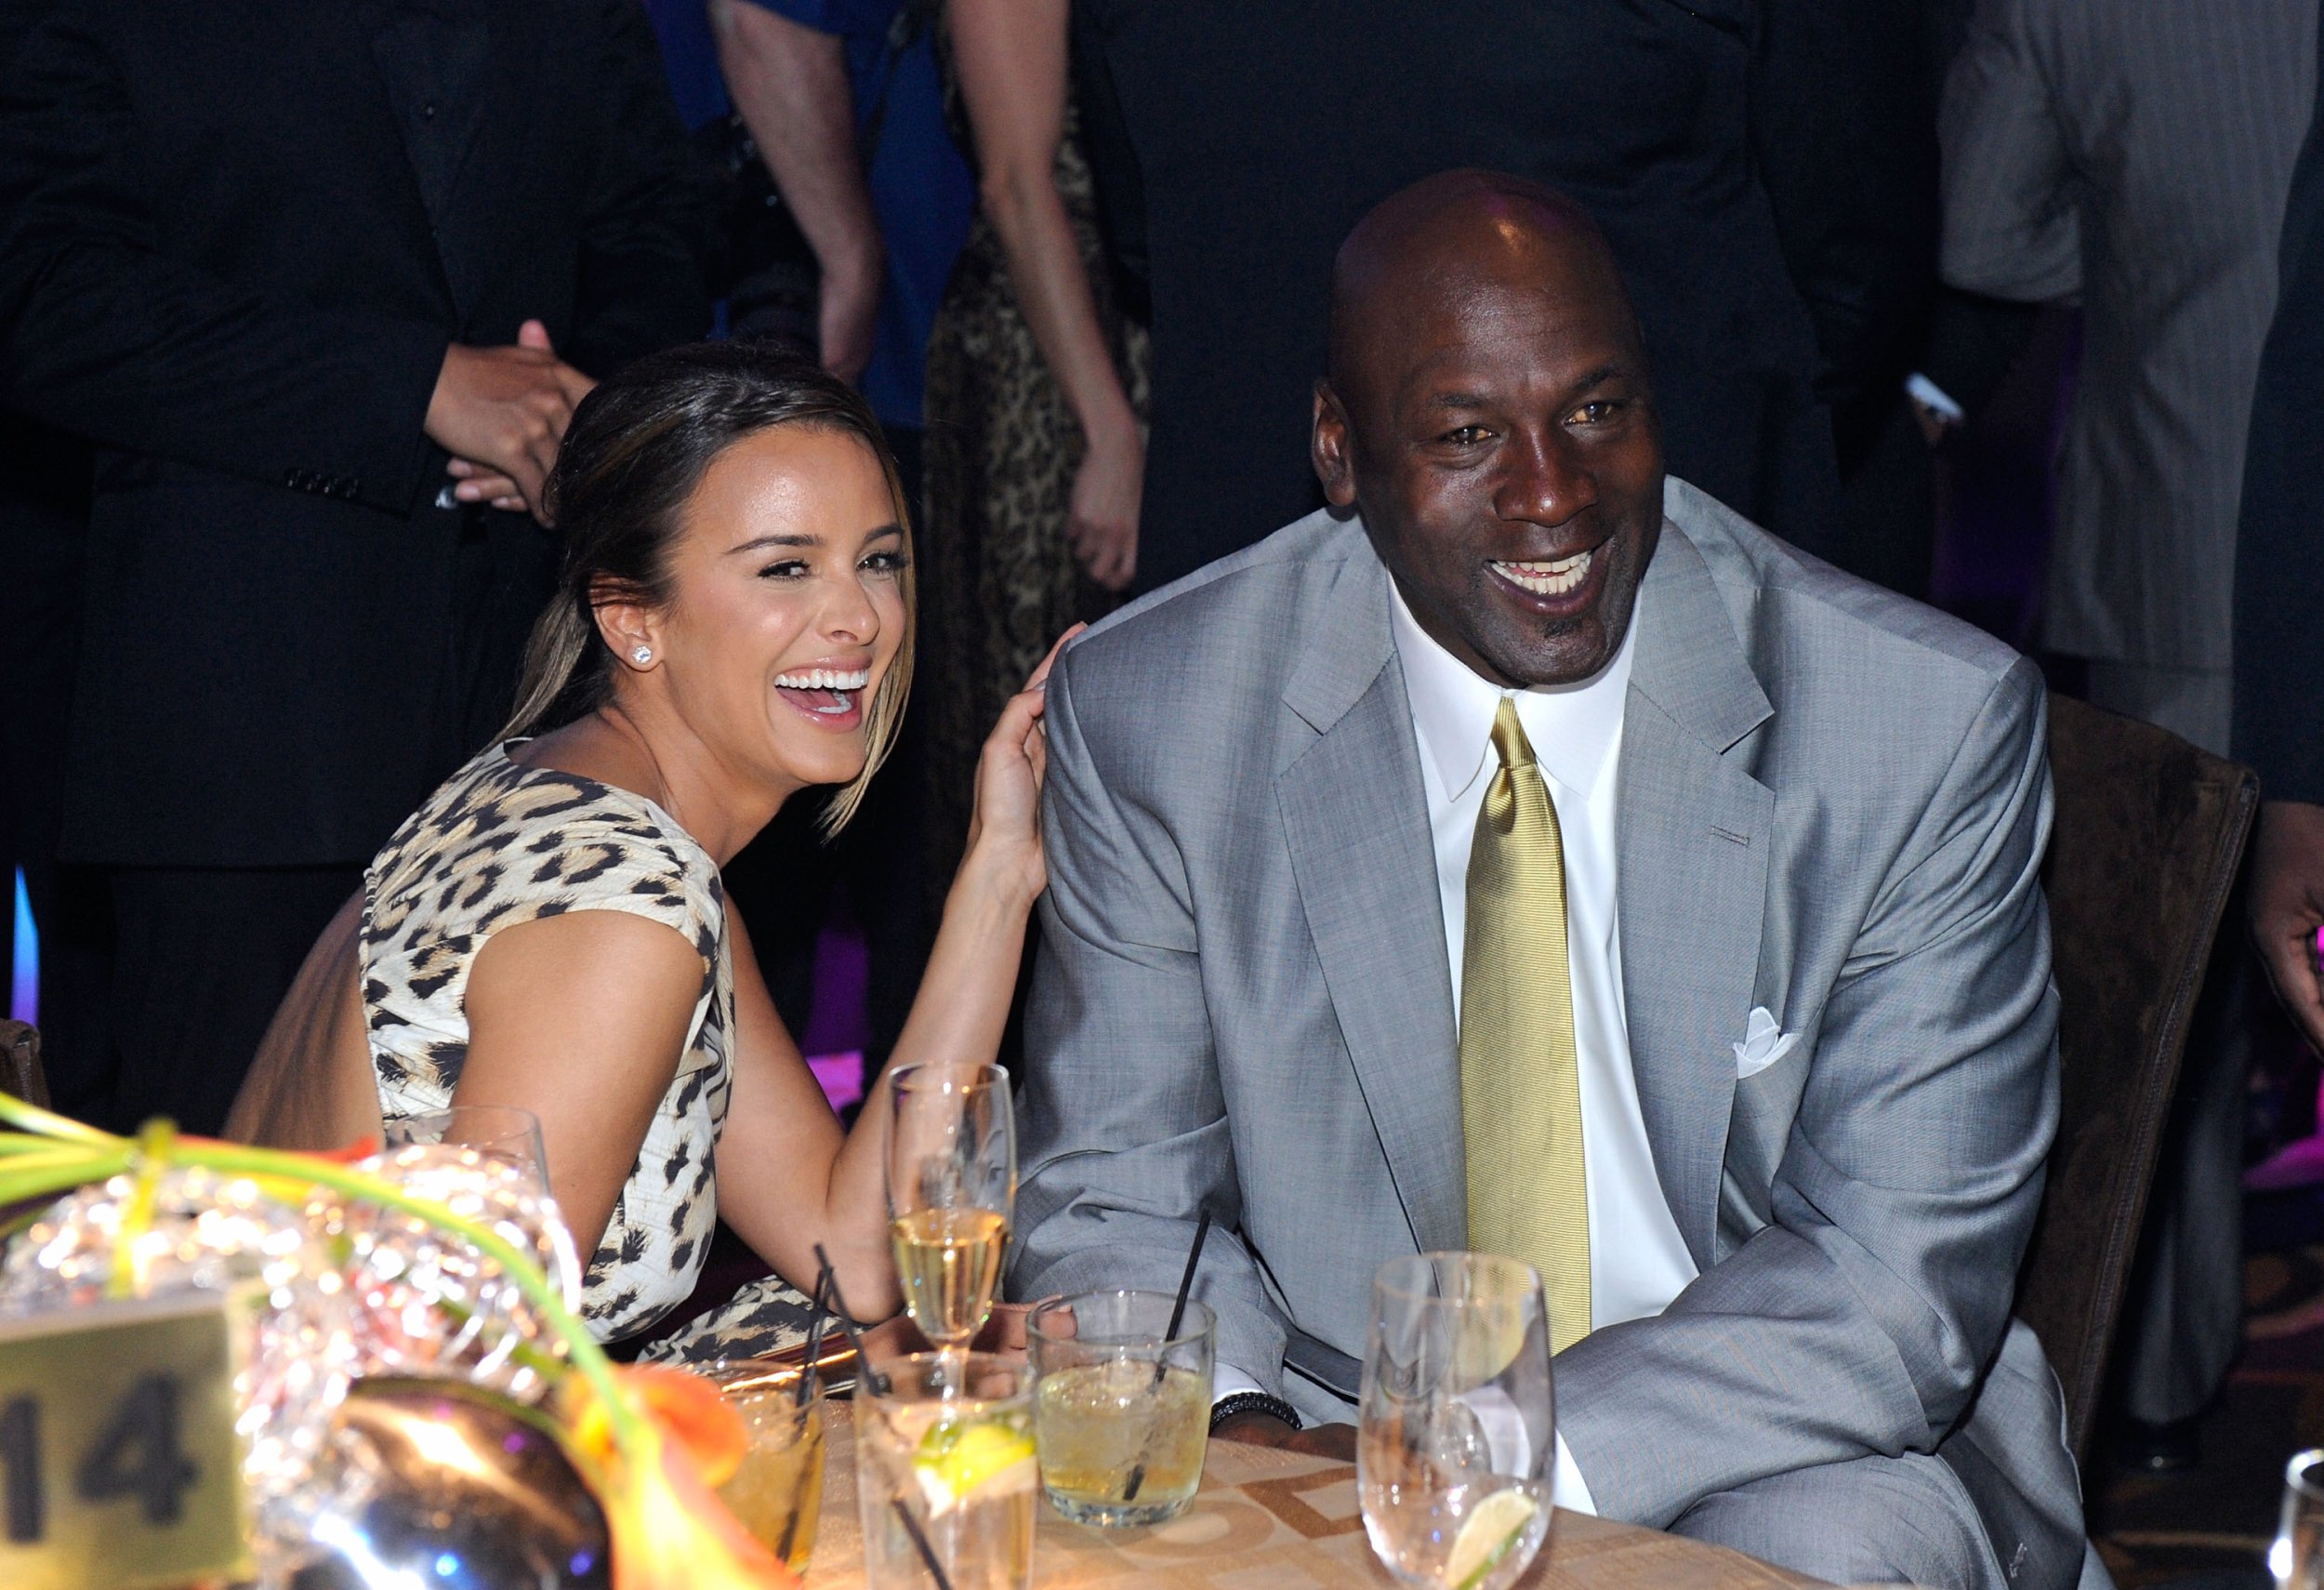 Yvette Prieto Michael Jordan Have Twin Girls Find Out What They Named Them